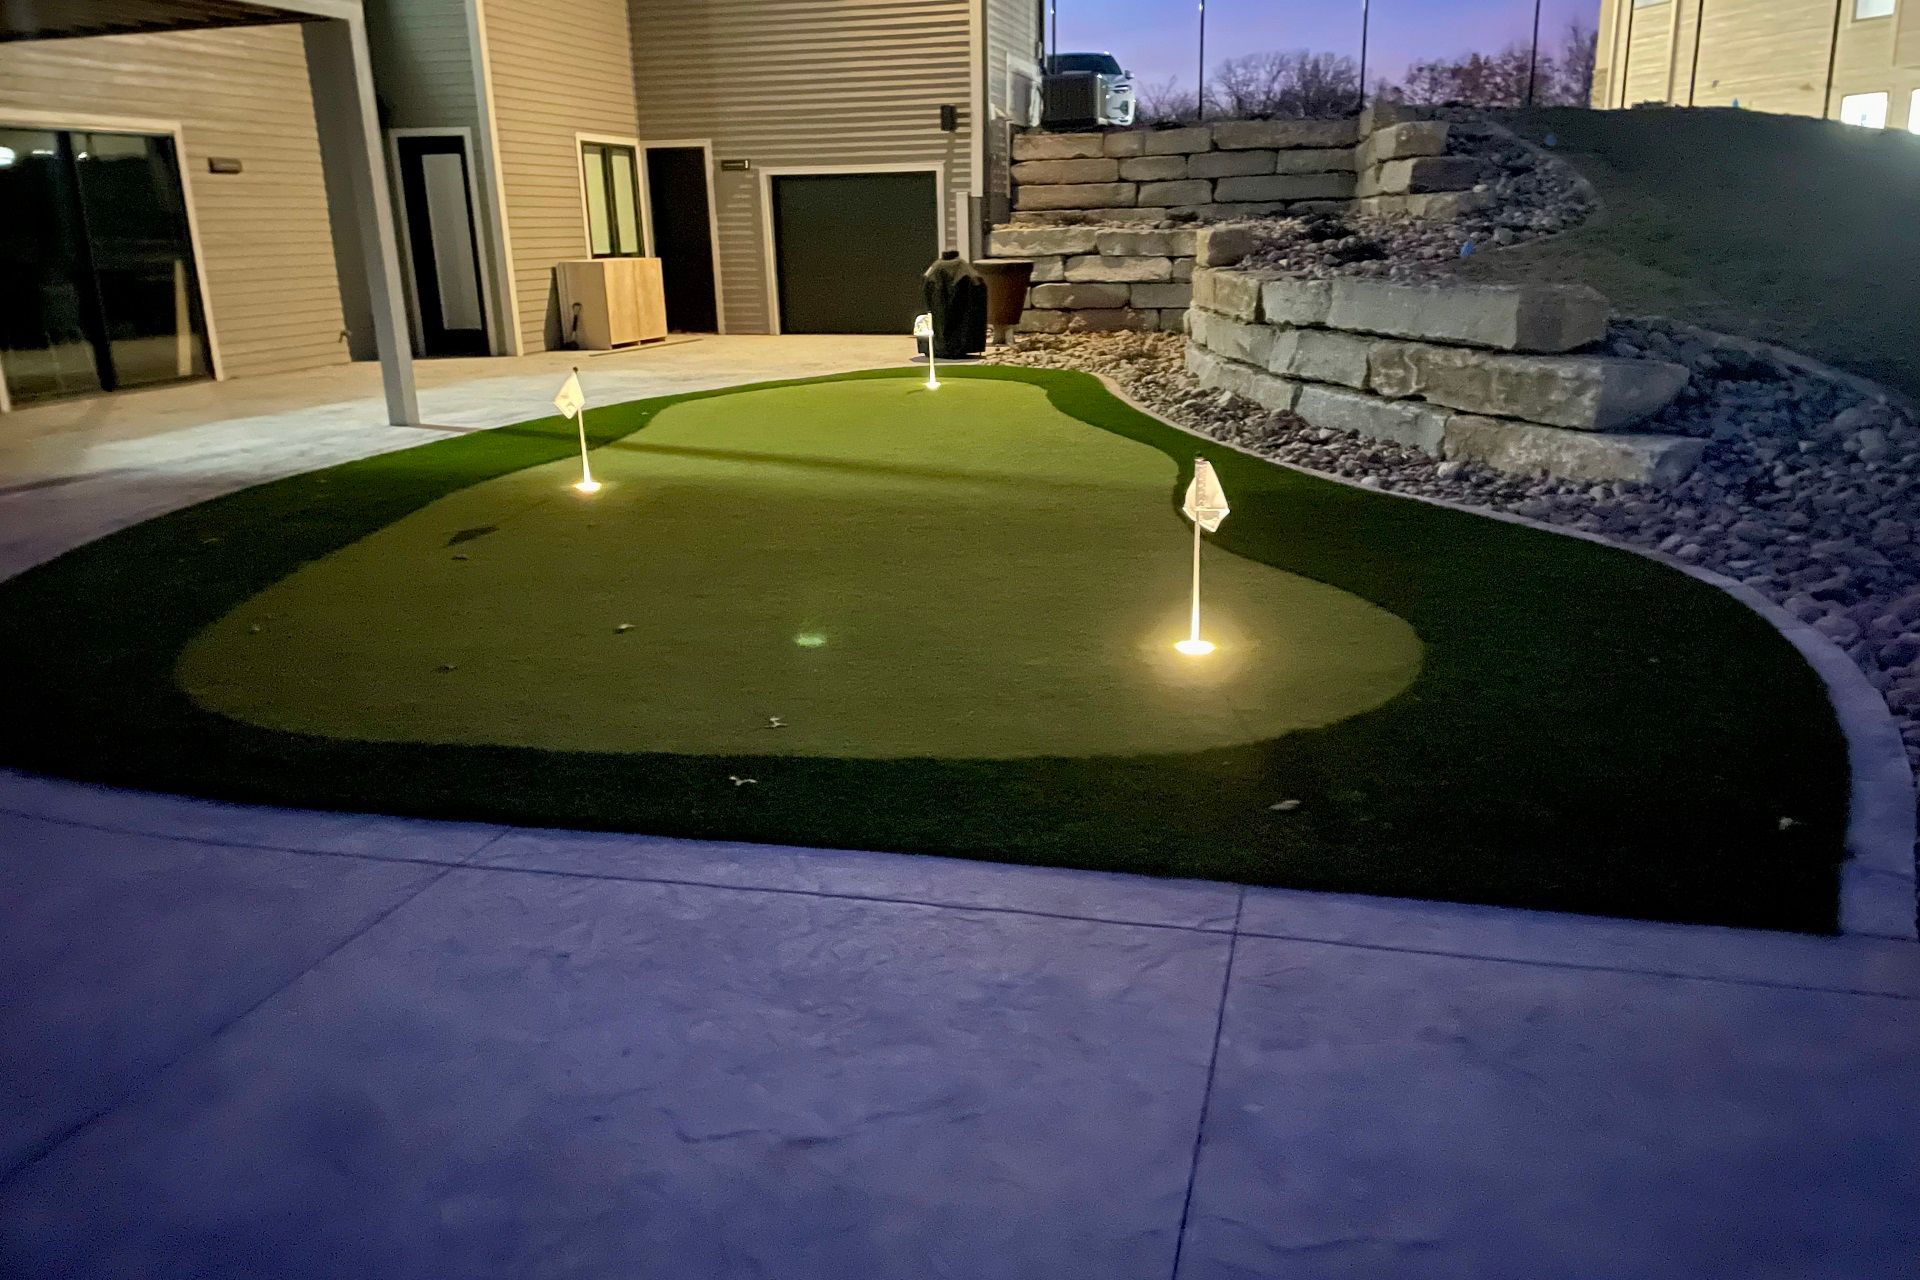 a golf course is lit up at night in front of a house